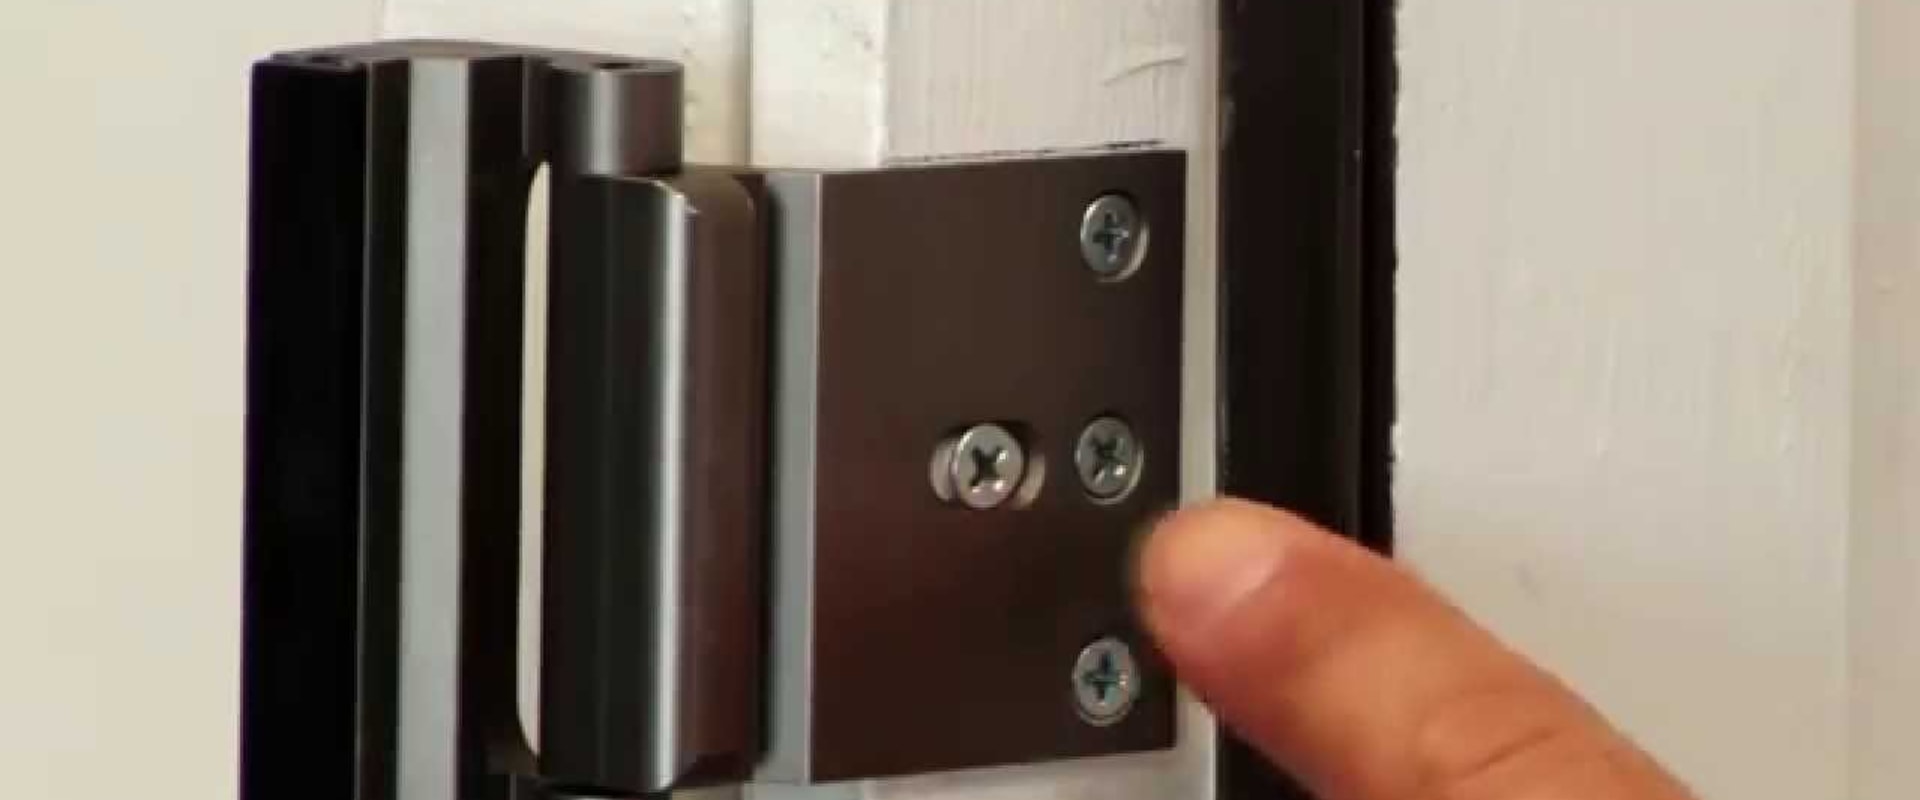 Secure Locks for Extra Security